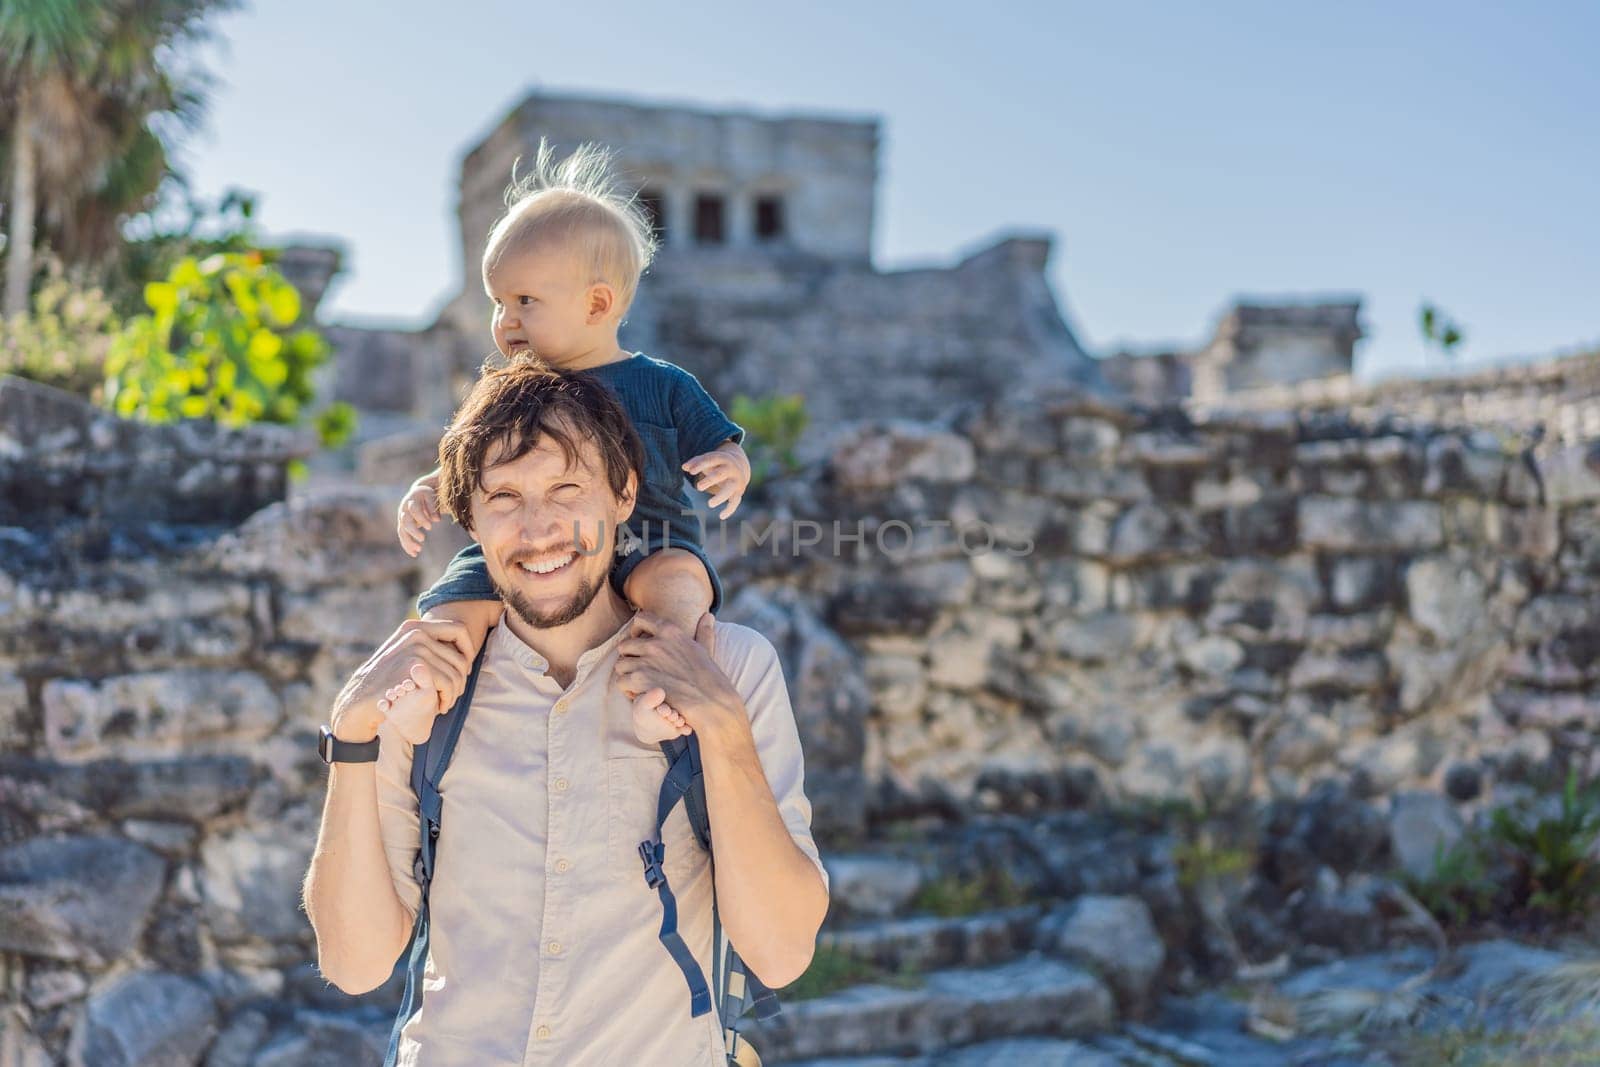 Father and son tourists enjoying the view Pre-Columbian Mayan walled city of Tulum, Quintana Roo, Mexico, North America, Tulum, Mexico. El Castillo - castle the Mayan city of Tulum main temple.